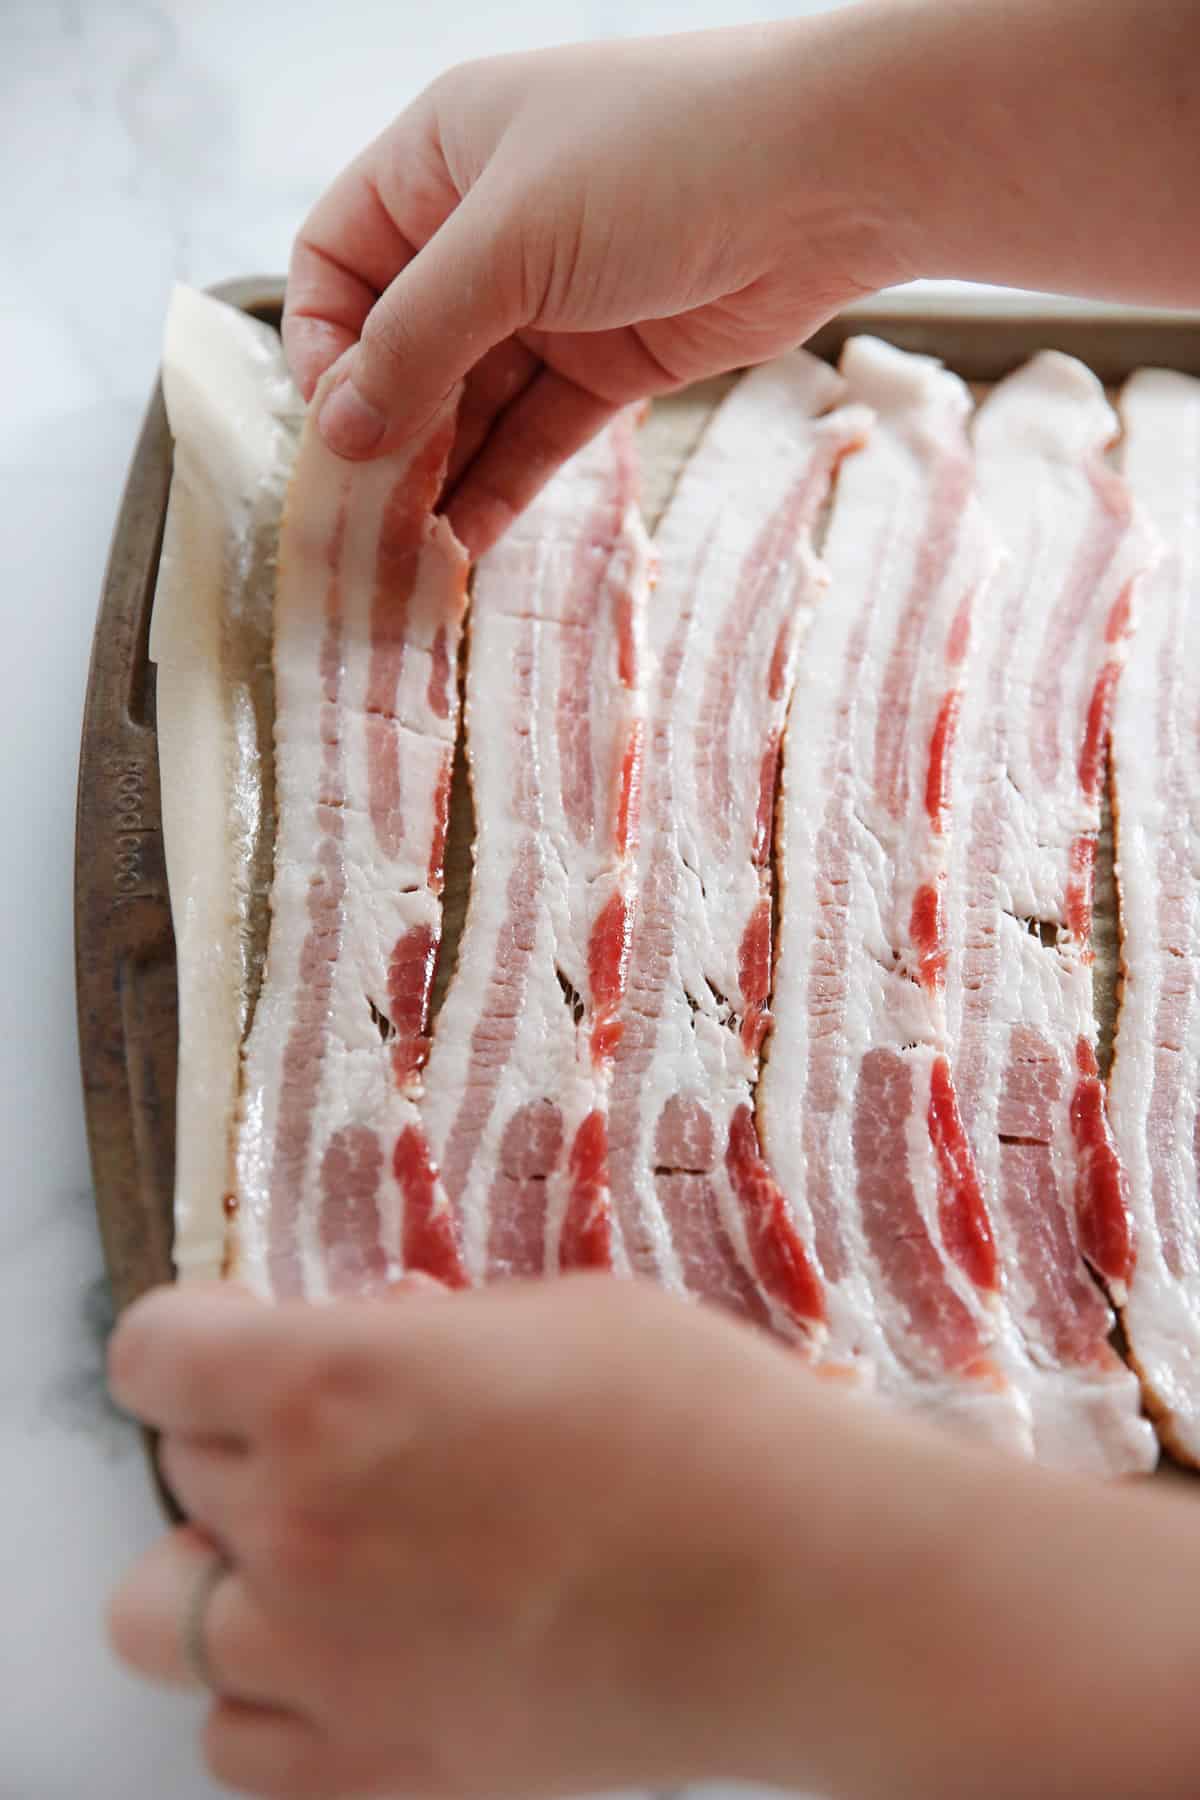 Place bacon on a sheet pan